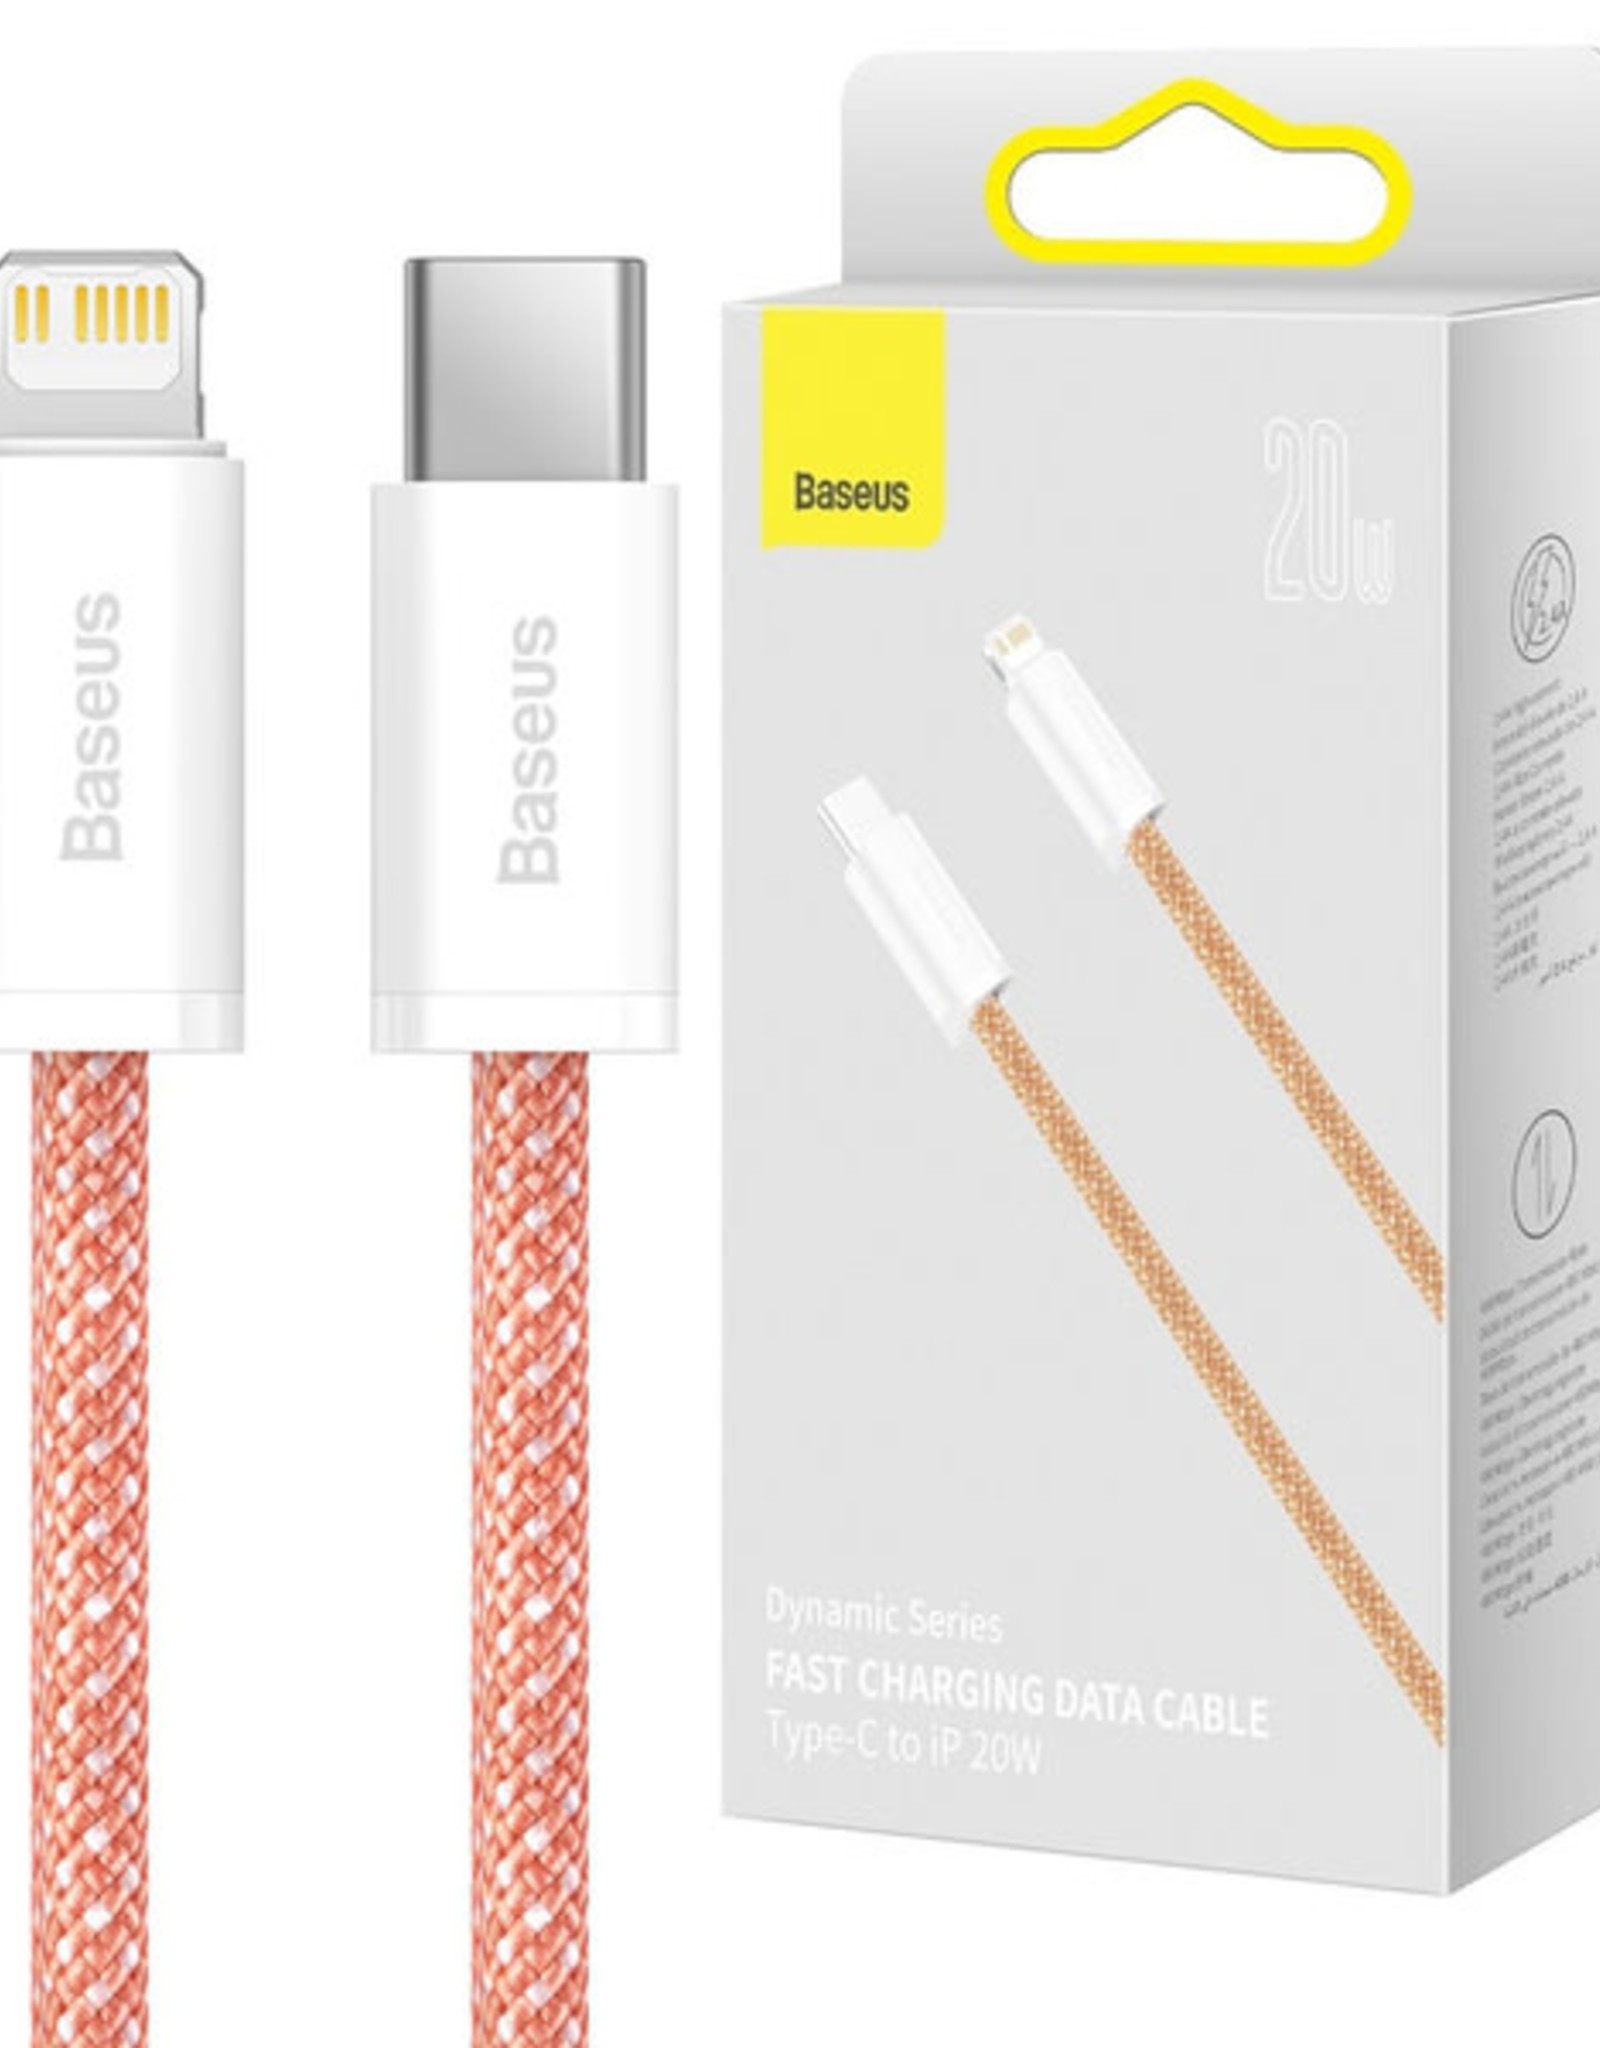 Baseus Dynamic Series Fast Charging Data Cable Type-C to iP 20W 1m